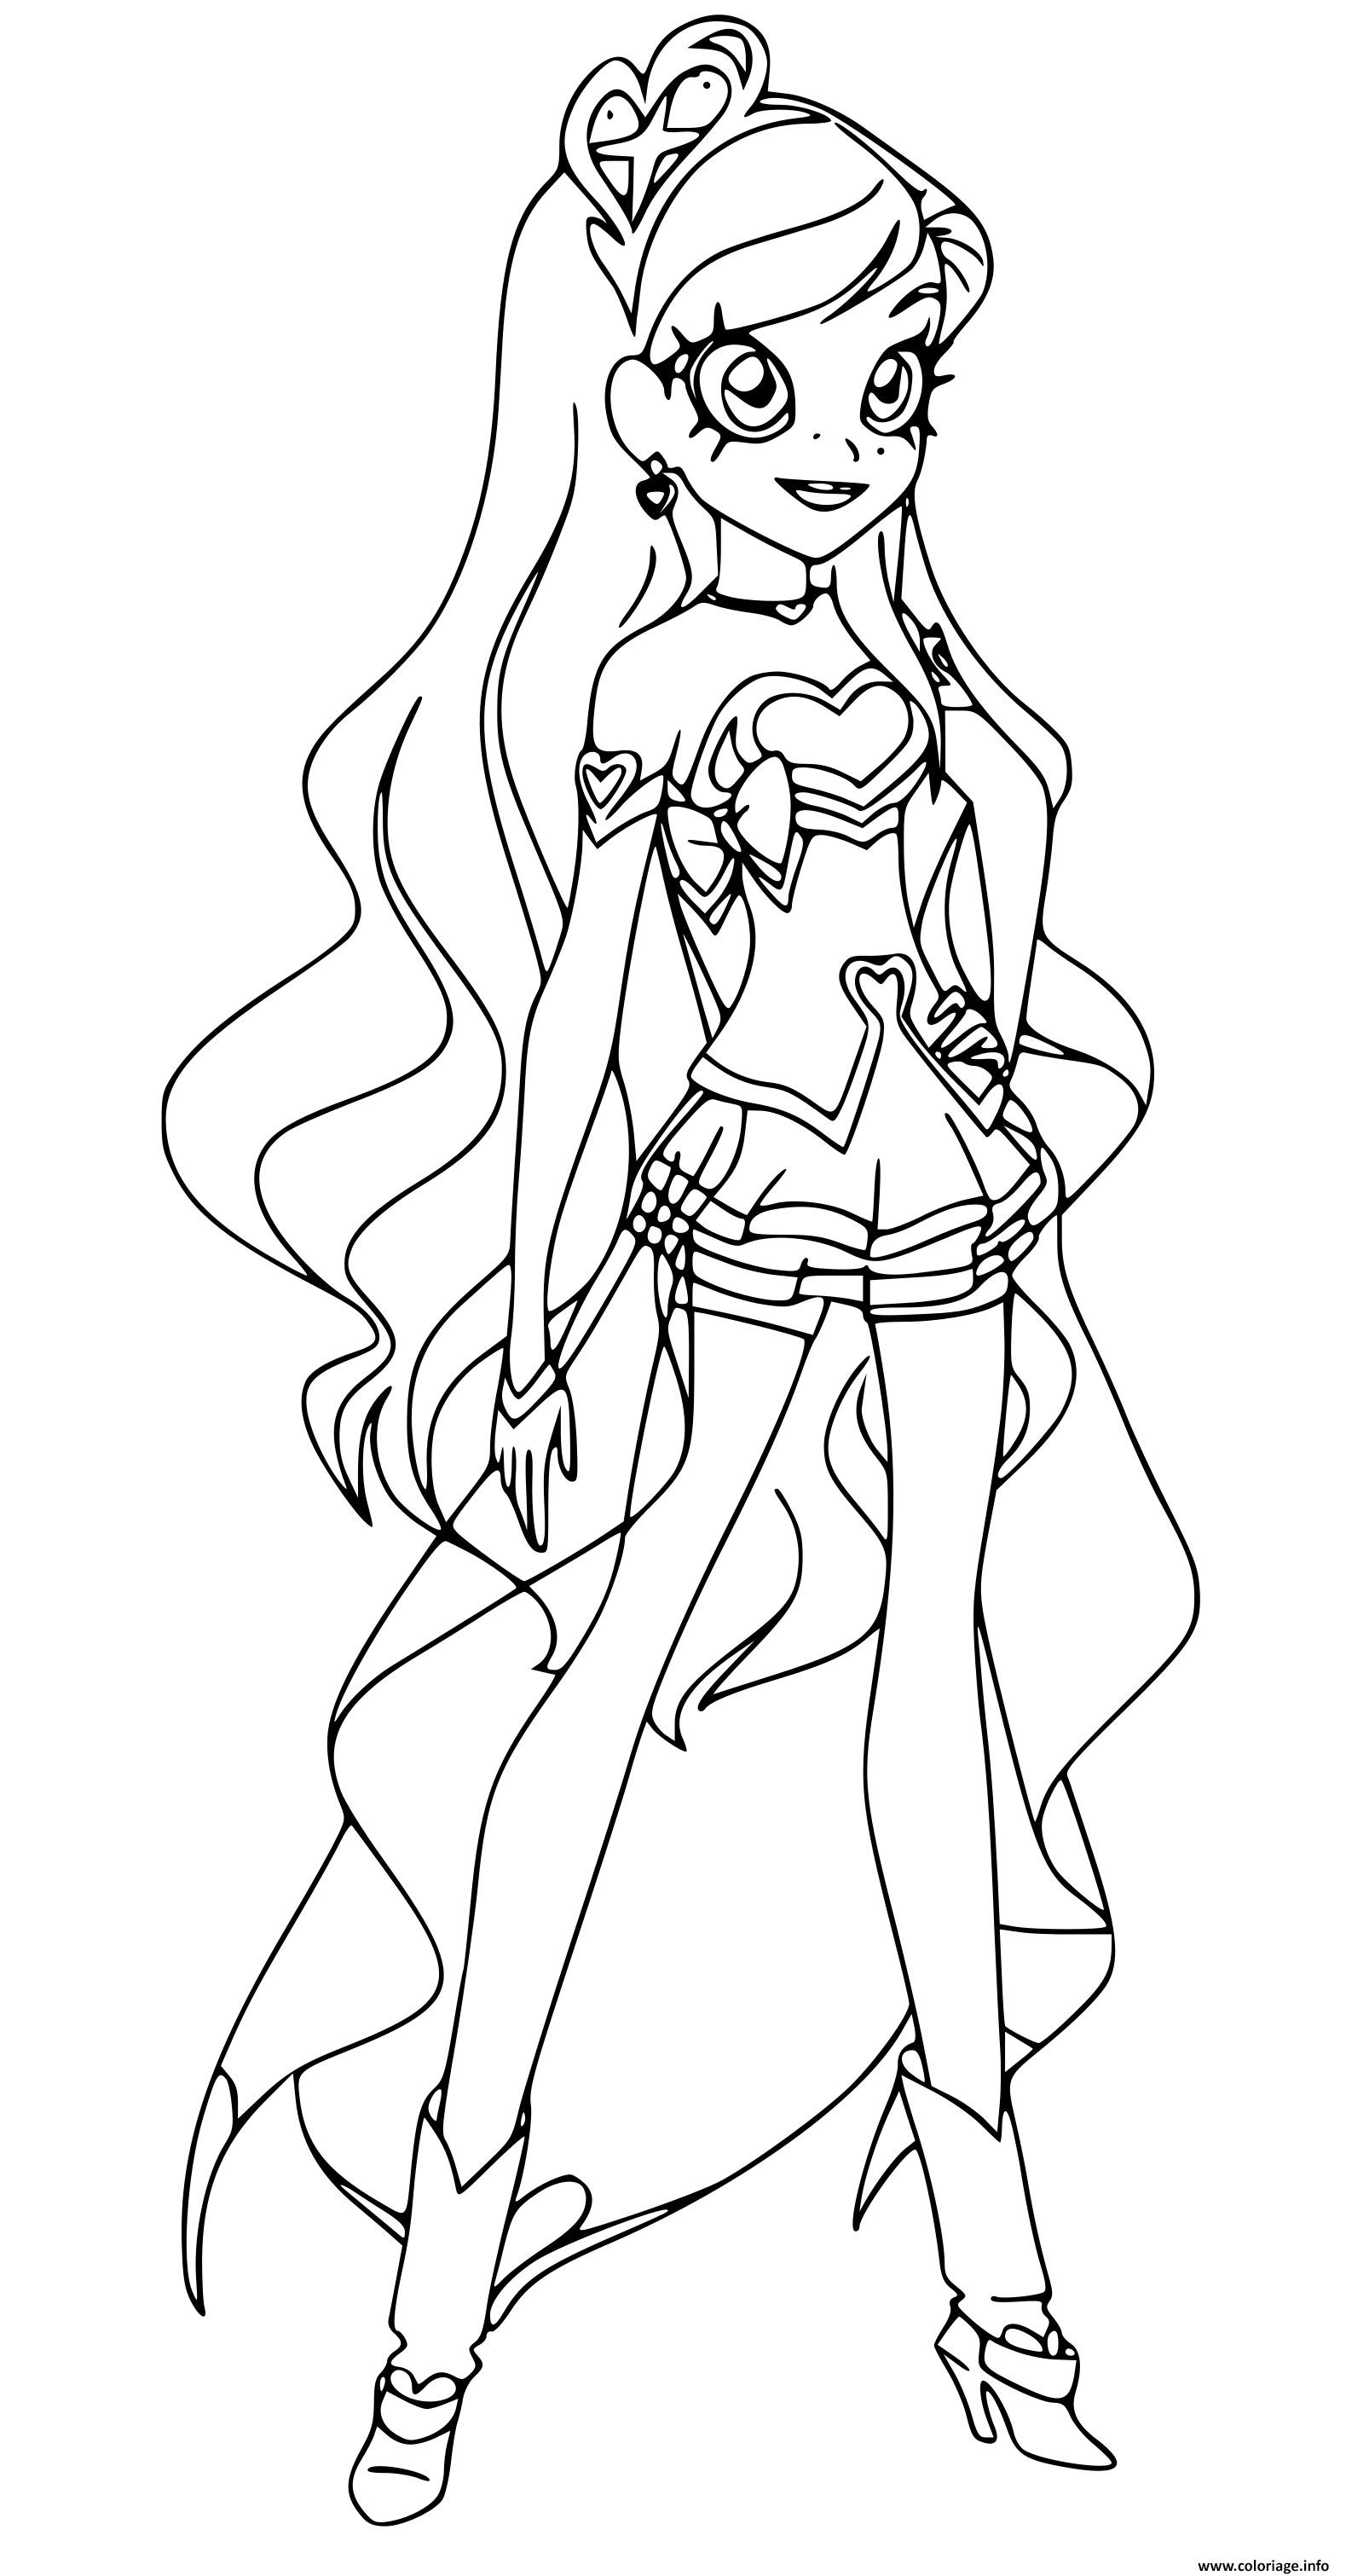 Lolirock Coloring Pages